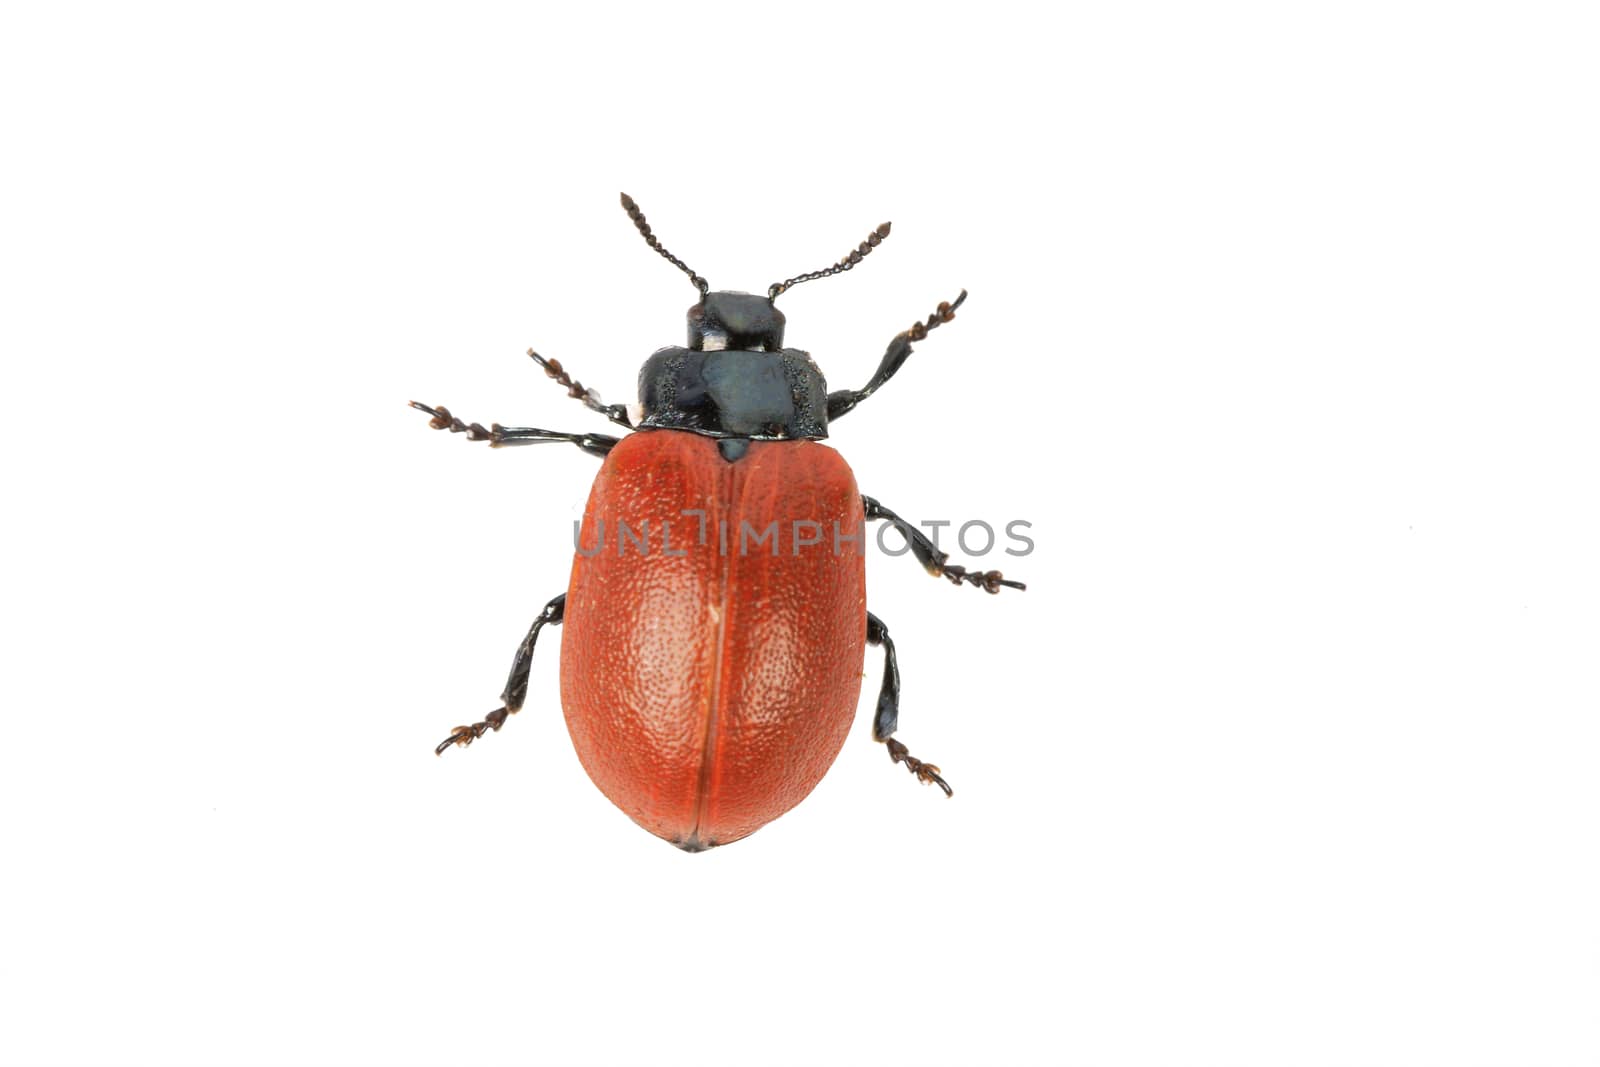 broad-shouldered leaf beetle Chrysomela populi isolated on a white background